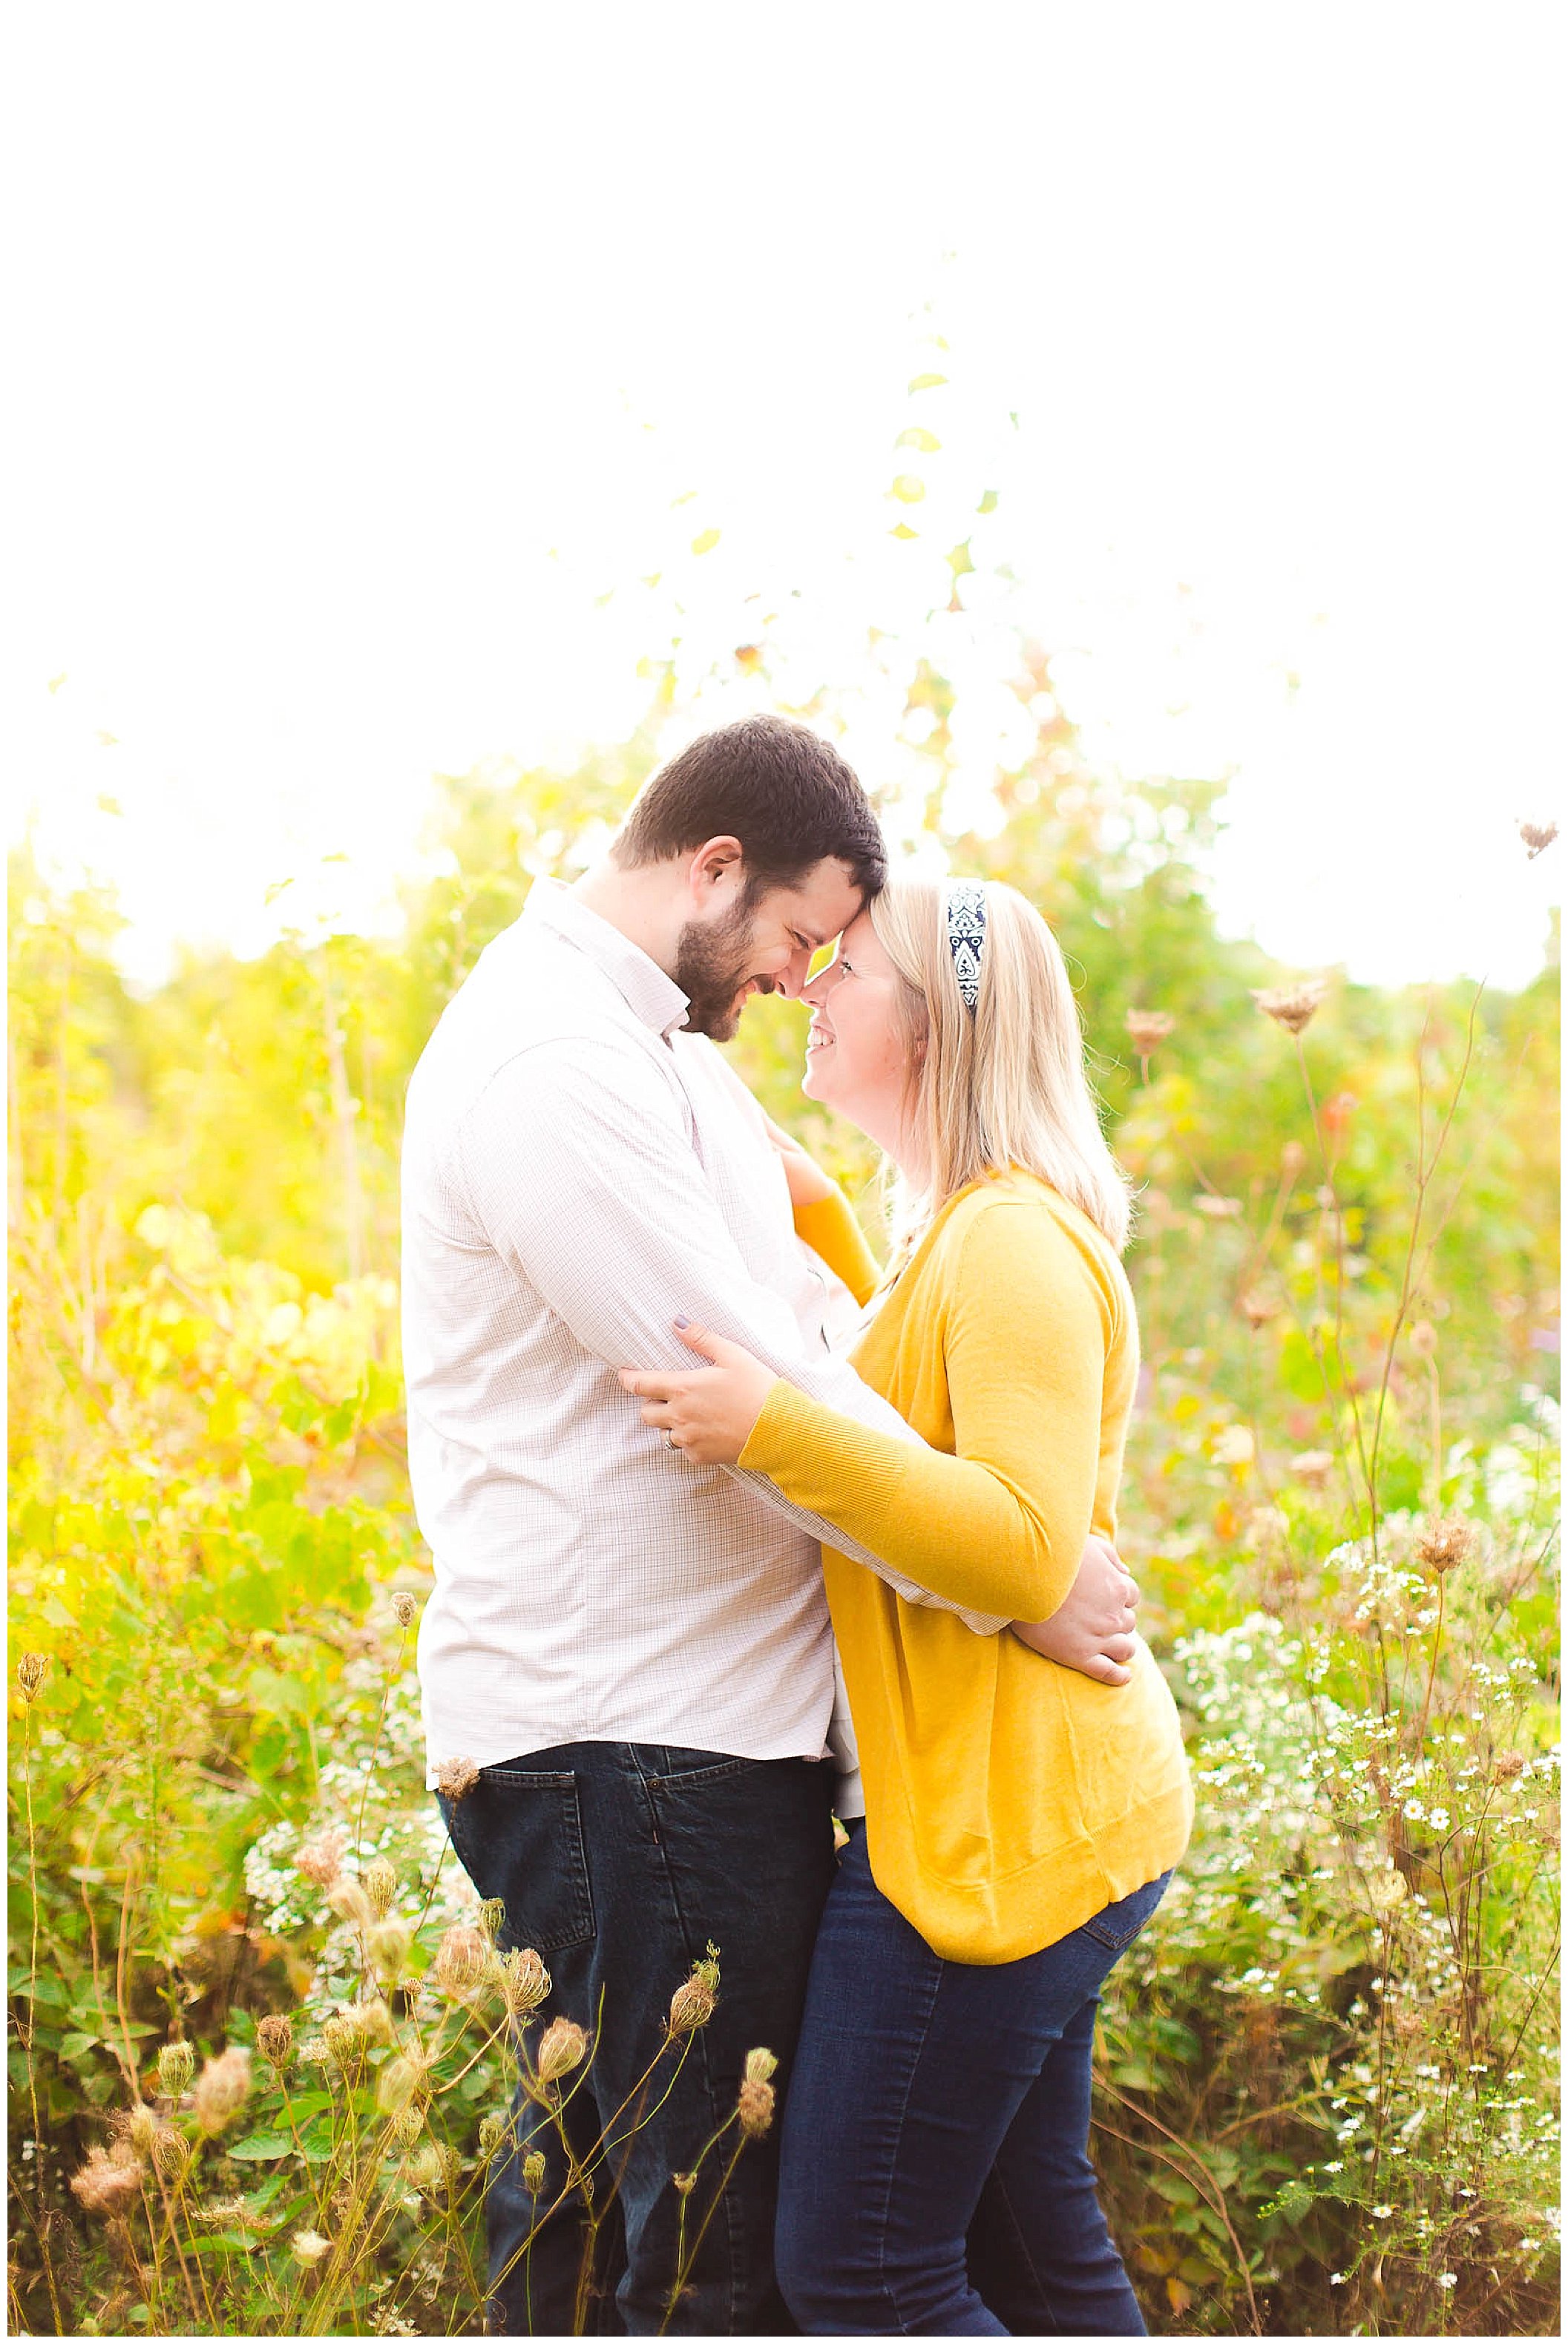 Sunshine filled engagement session in a field of wildflowers, Fort Wayne Indiana Wedding Photographer_0021.jpg